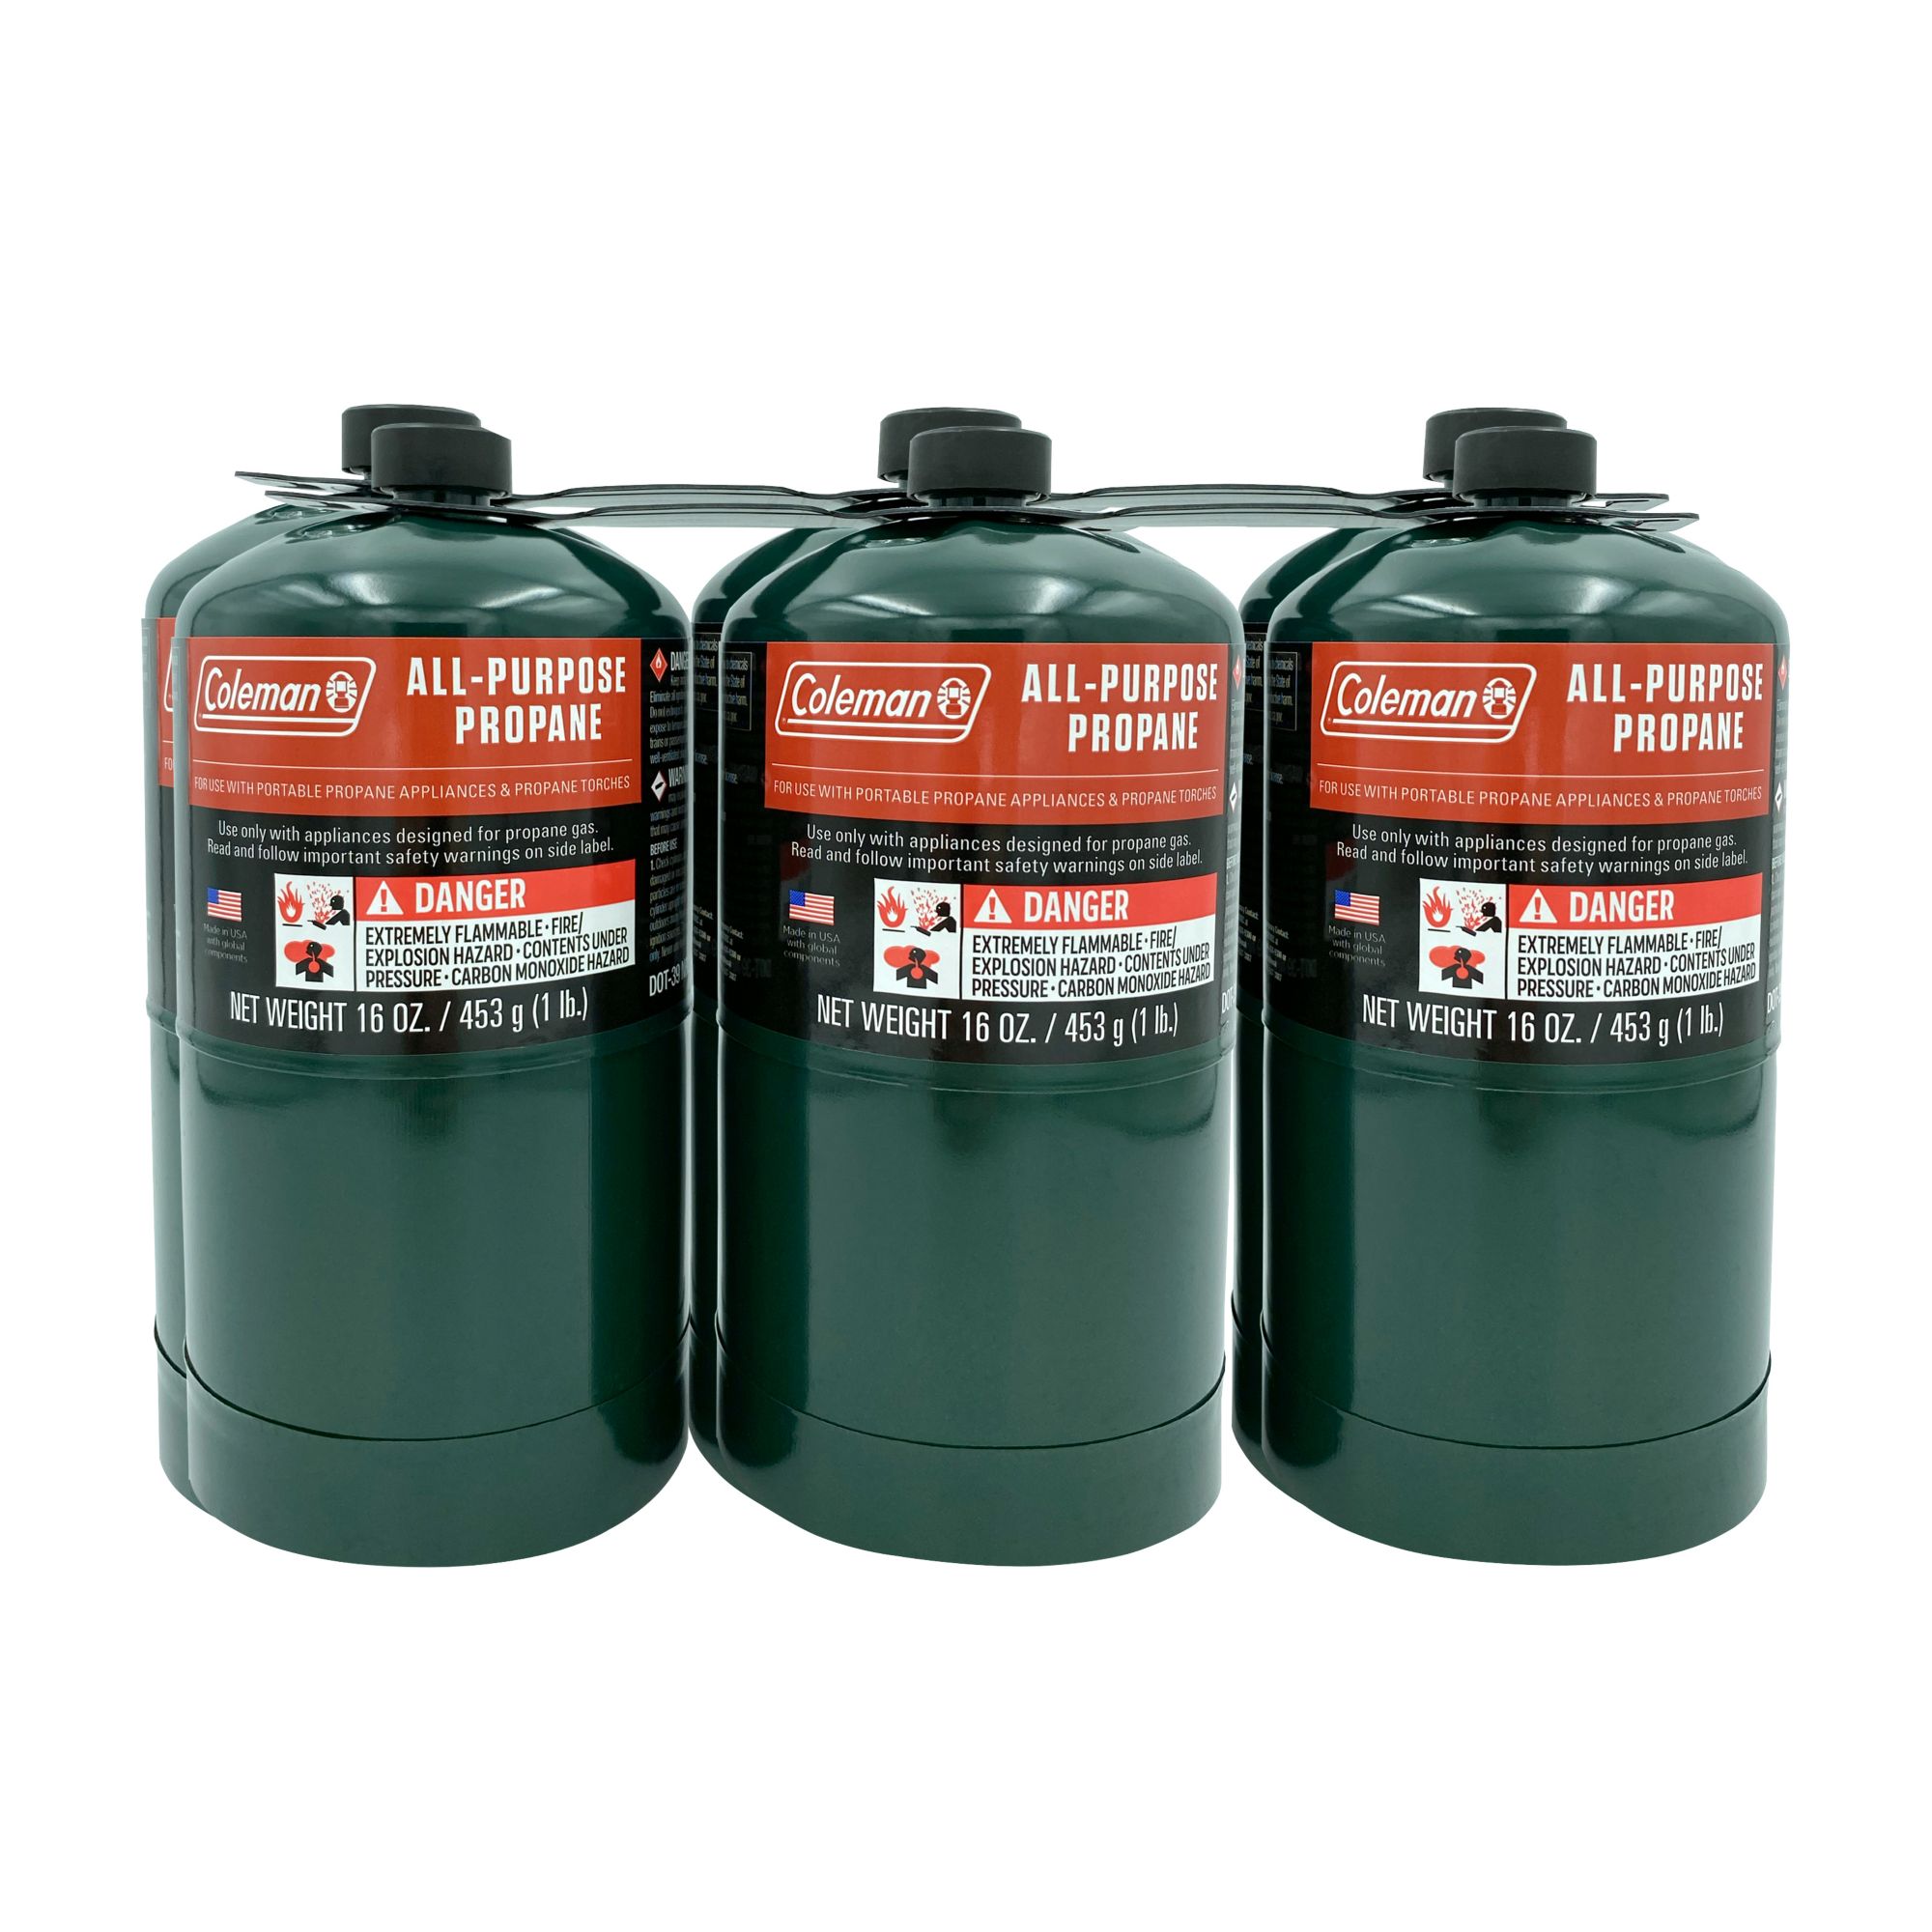 Worthington Pro Grade 40 lb Propane Tank Refillable/Exchangeable for  Portable Cooking and Propane-Fueled Appliances in the Propane Tanks &  Accessories department at